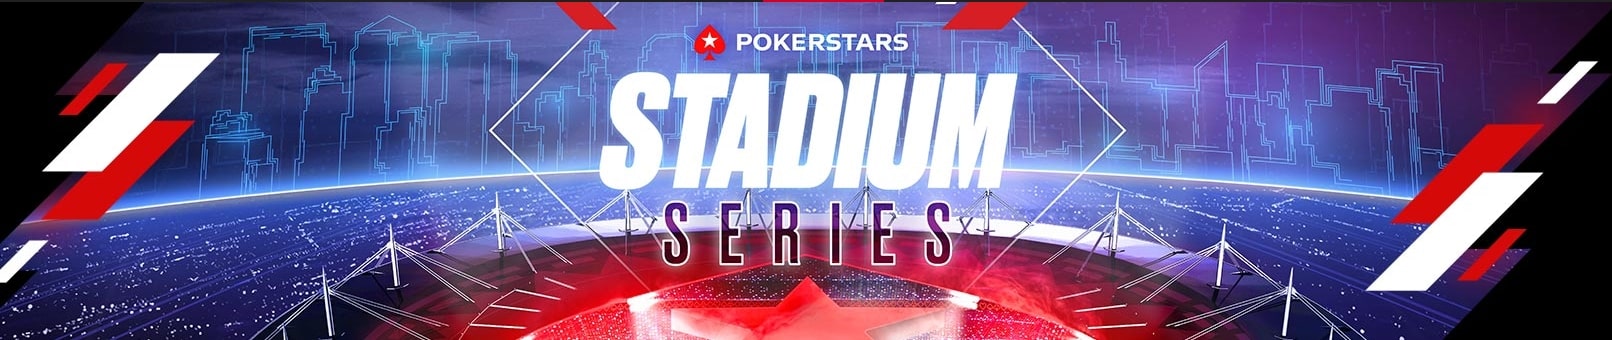 $ 50M at the Stadium Series at Pokerstars in July!